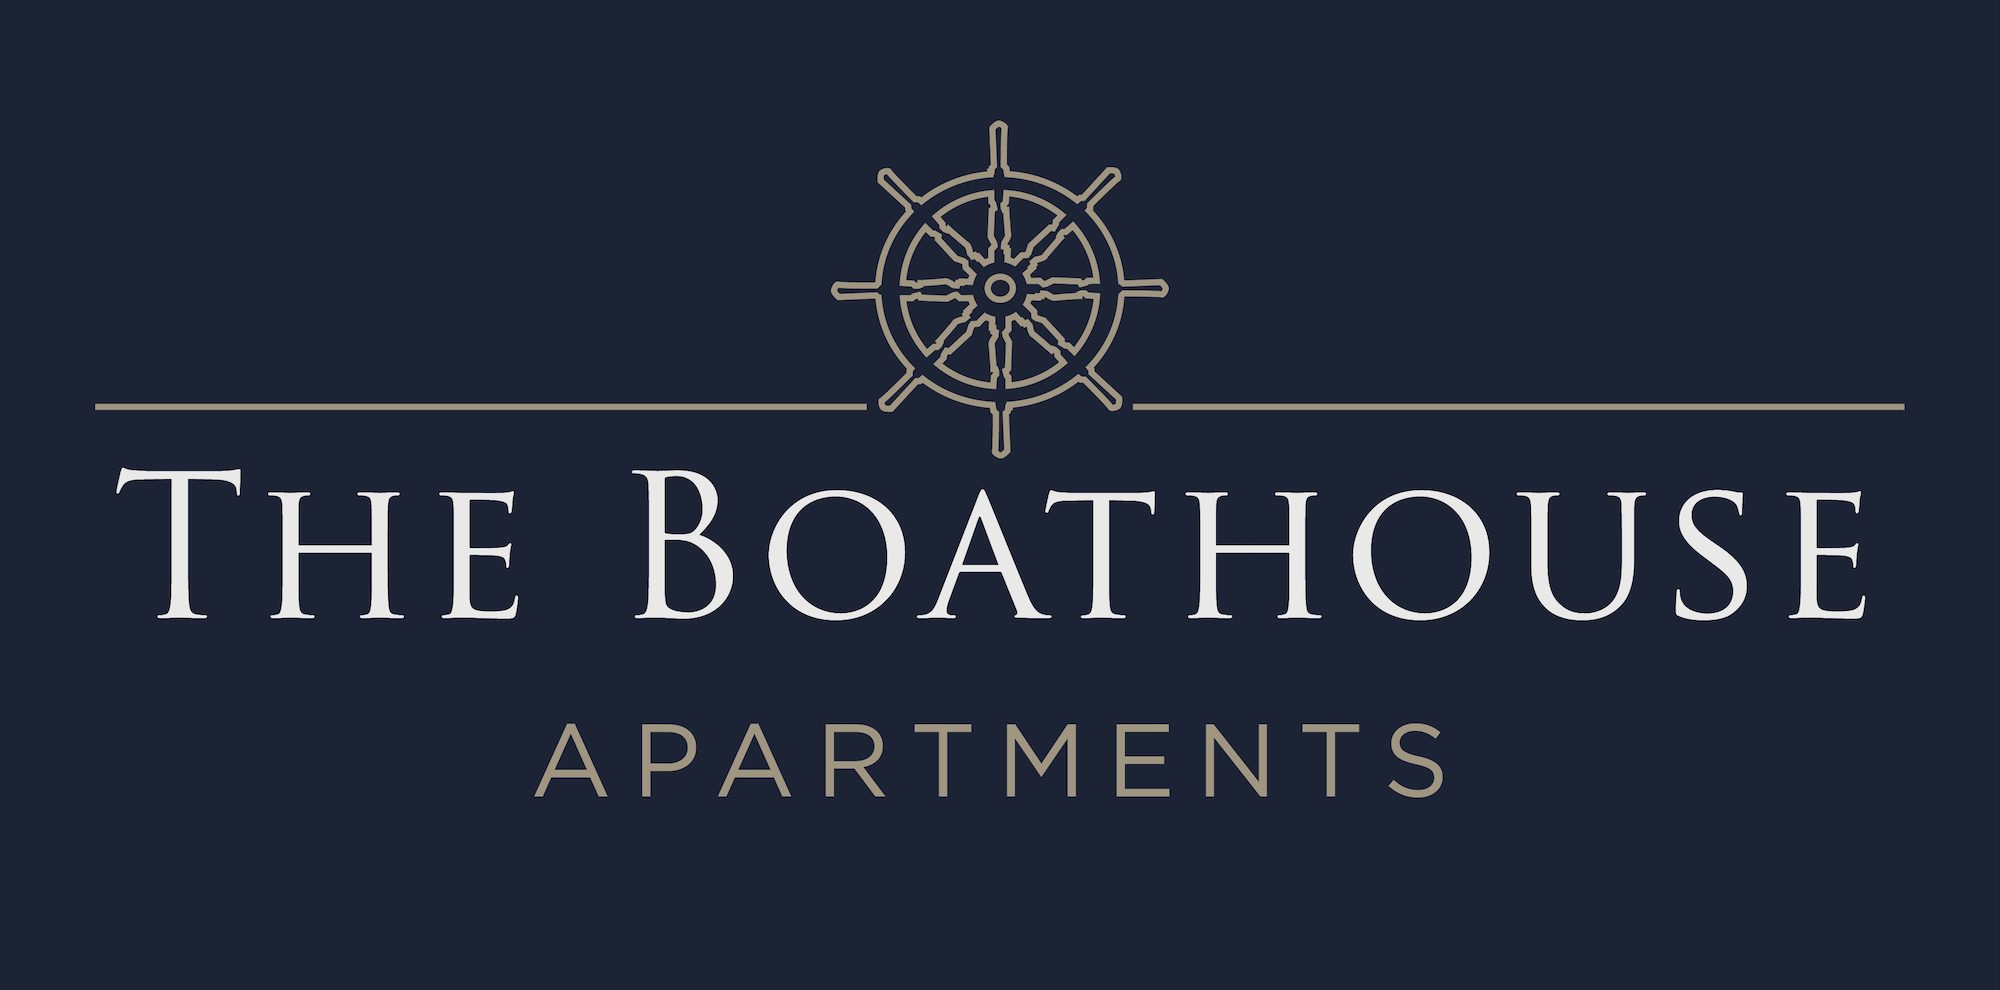 The Boathouse Apartments